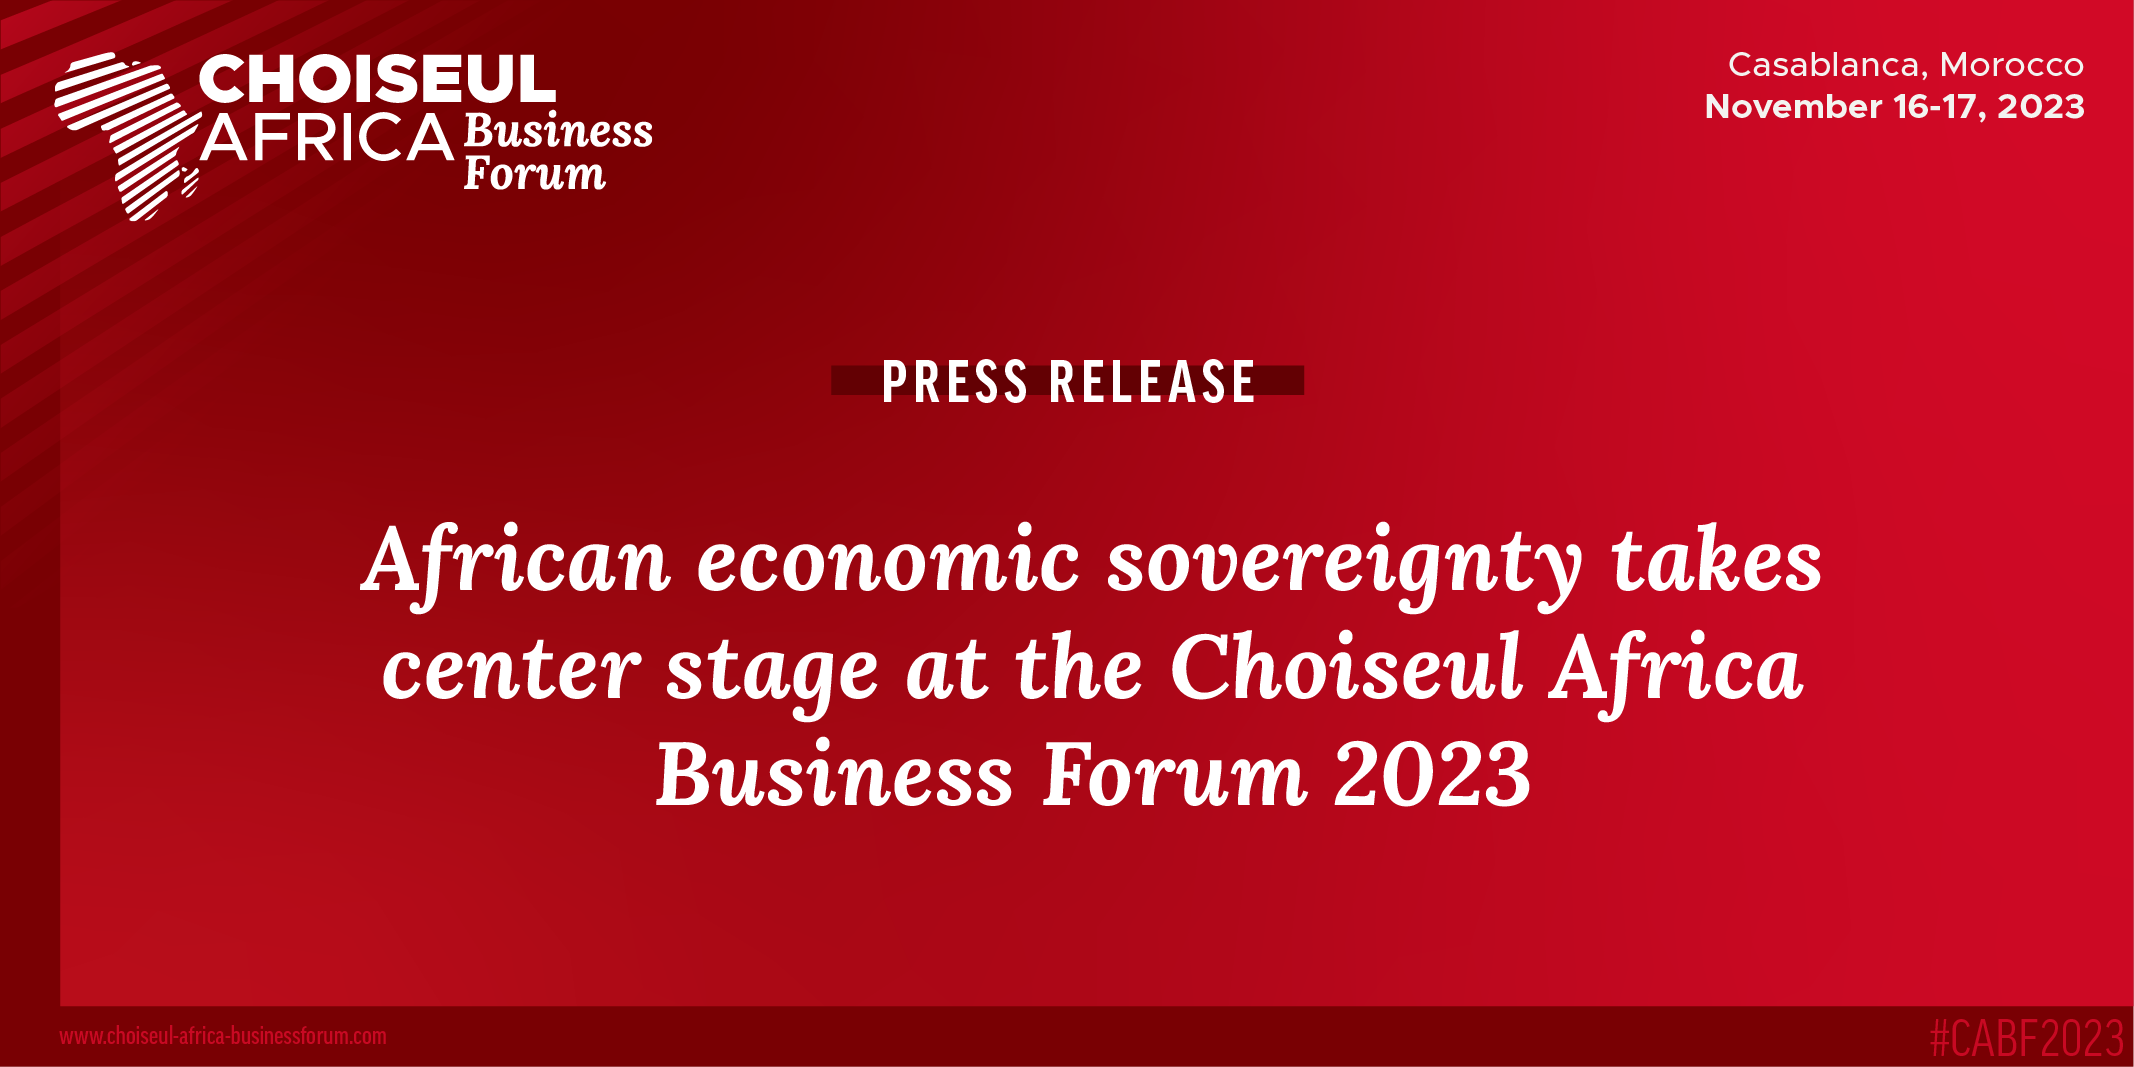 Press Release : African economic sovereignty takes center stage at the Choiseul Africa Business Forum 2023